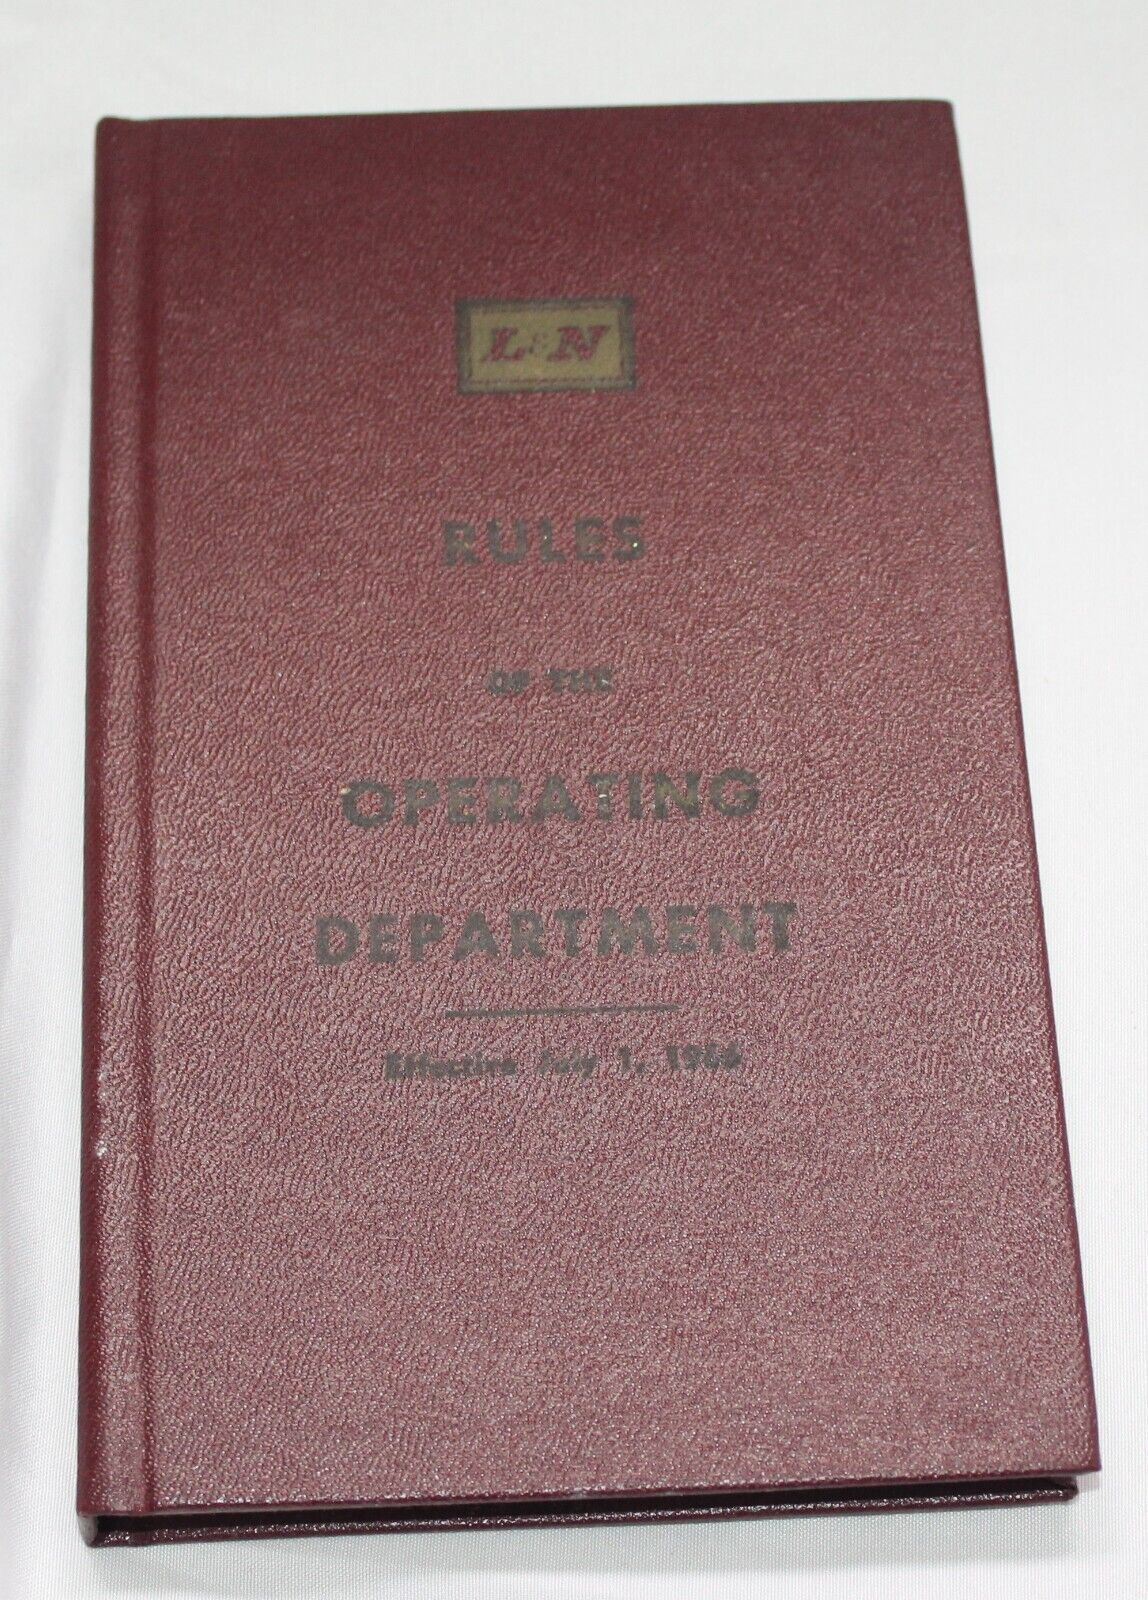 L&N Louisville & Nashville Railroad Rules of Operating Department Book 1974 HB